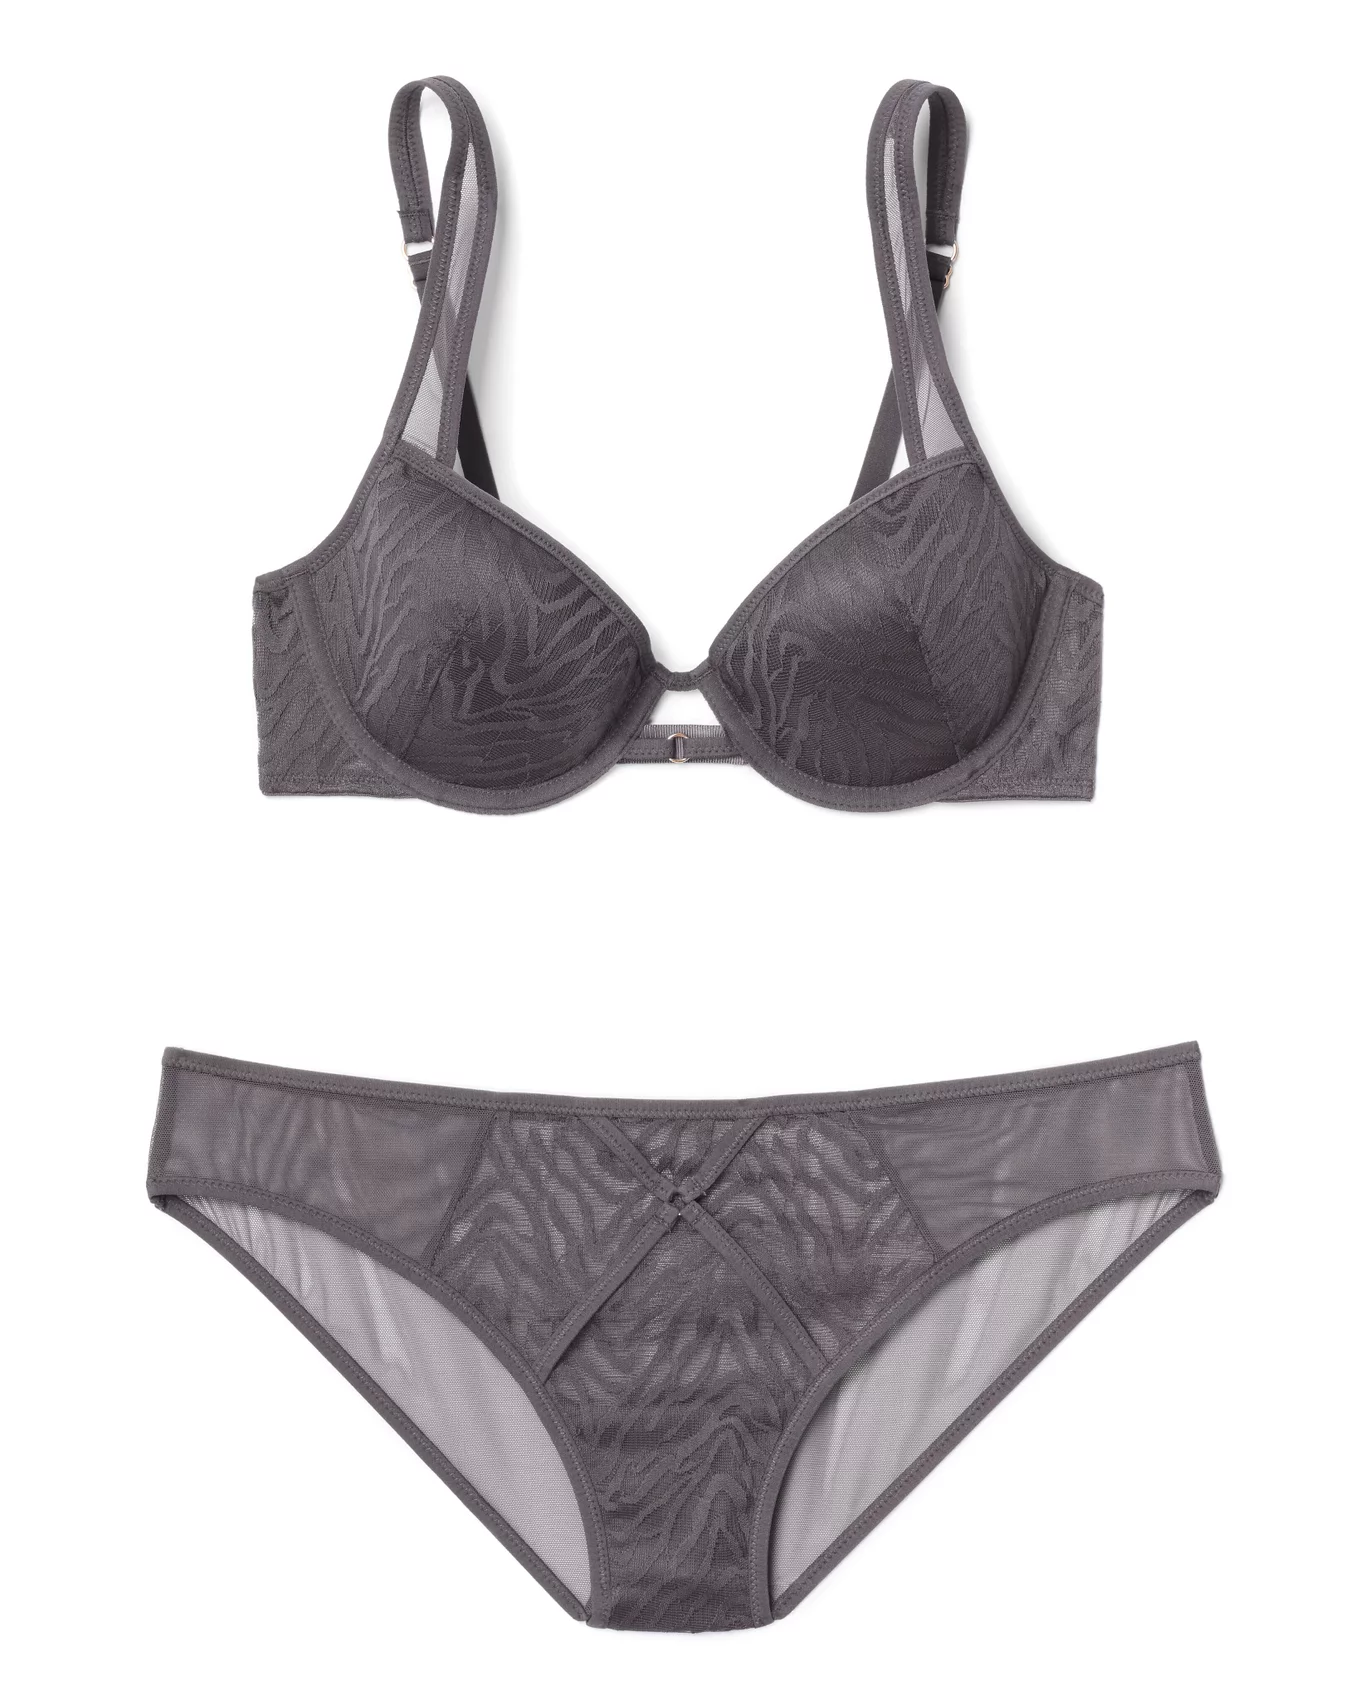 Adore Me Emanuelly Push Up Balconette Bra Black Rose Smoke Size 38DD - $35  (40% Off Retail) - From Michelle